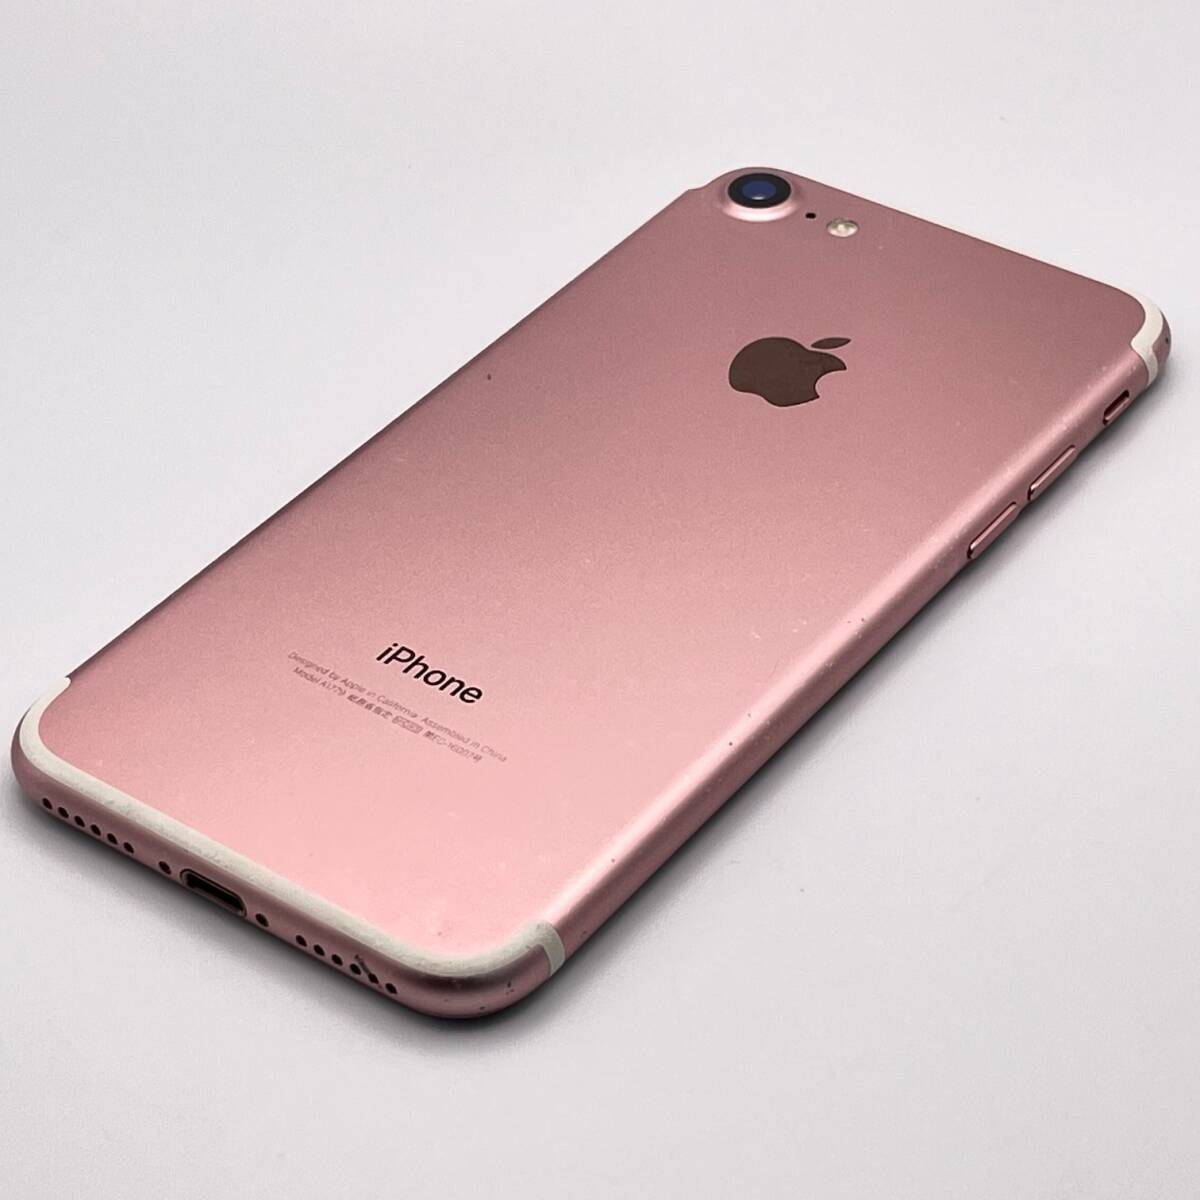  secondhand goods Apple Apple iPhone 7 32GB rose Gold SIM lock released .SIM free 1 jpy from selling out 